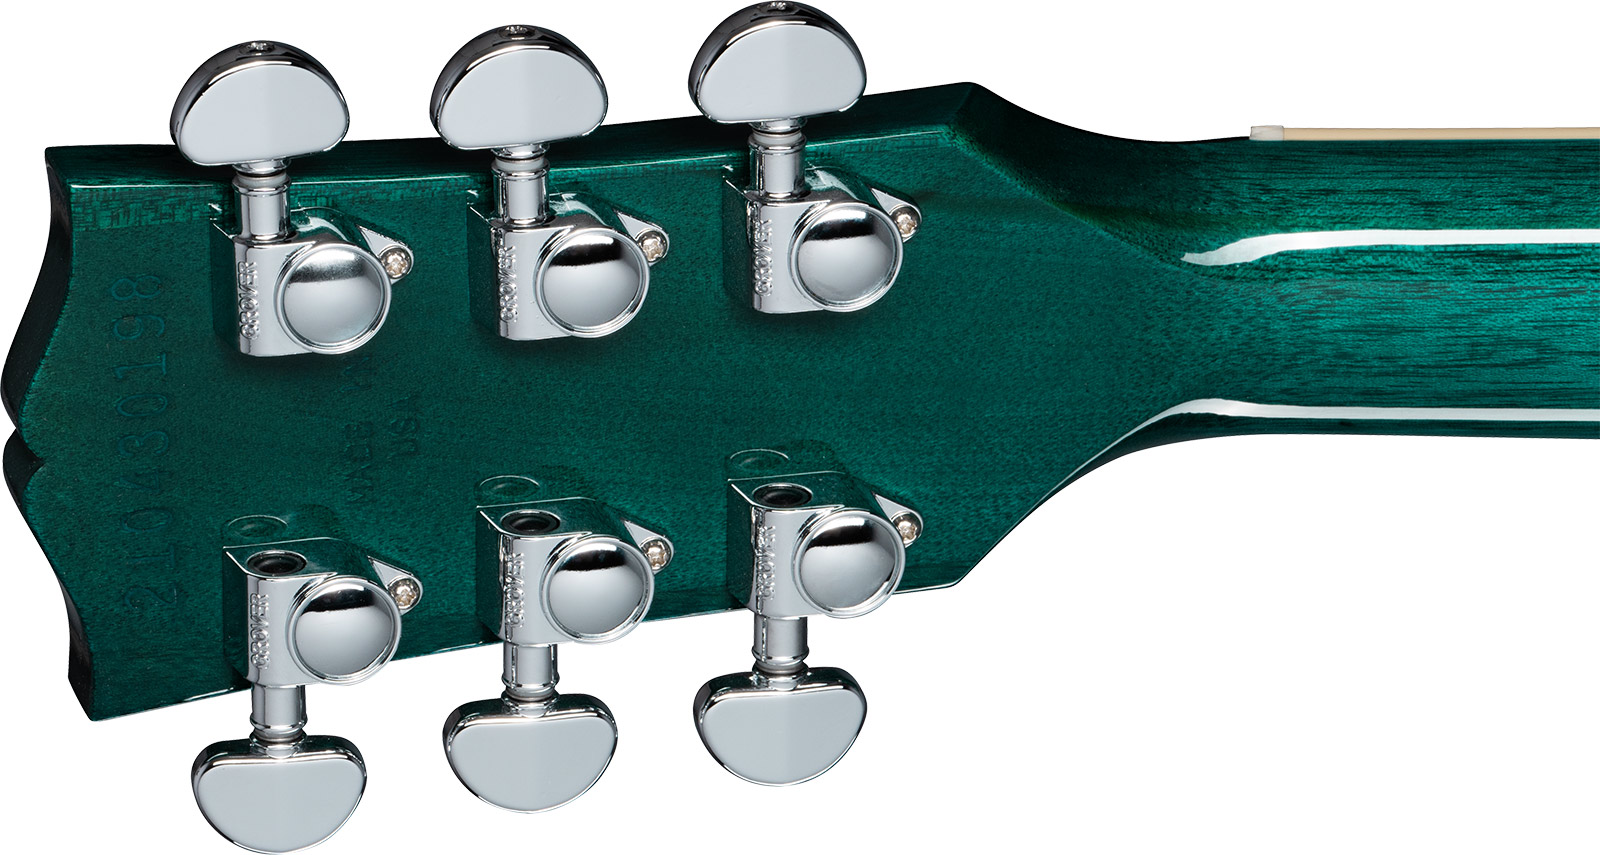 Gibson Sg Standard Custom Color 2h Ht Rw - Translucent Teal - Double cut electric guitar - Variation 4